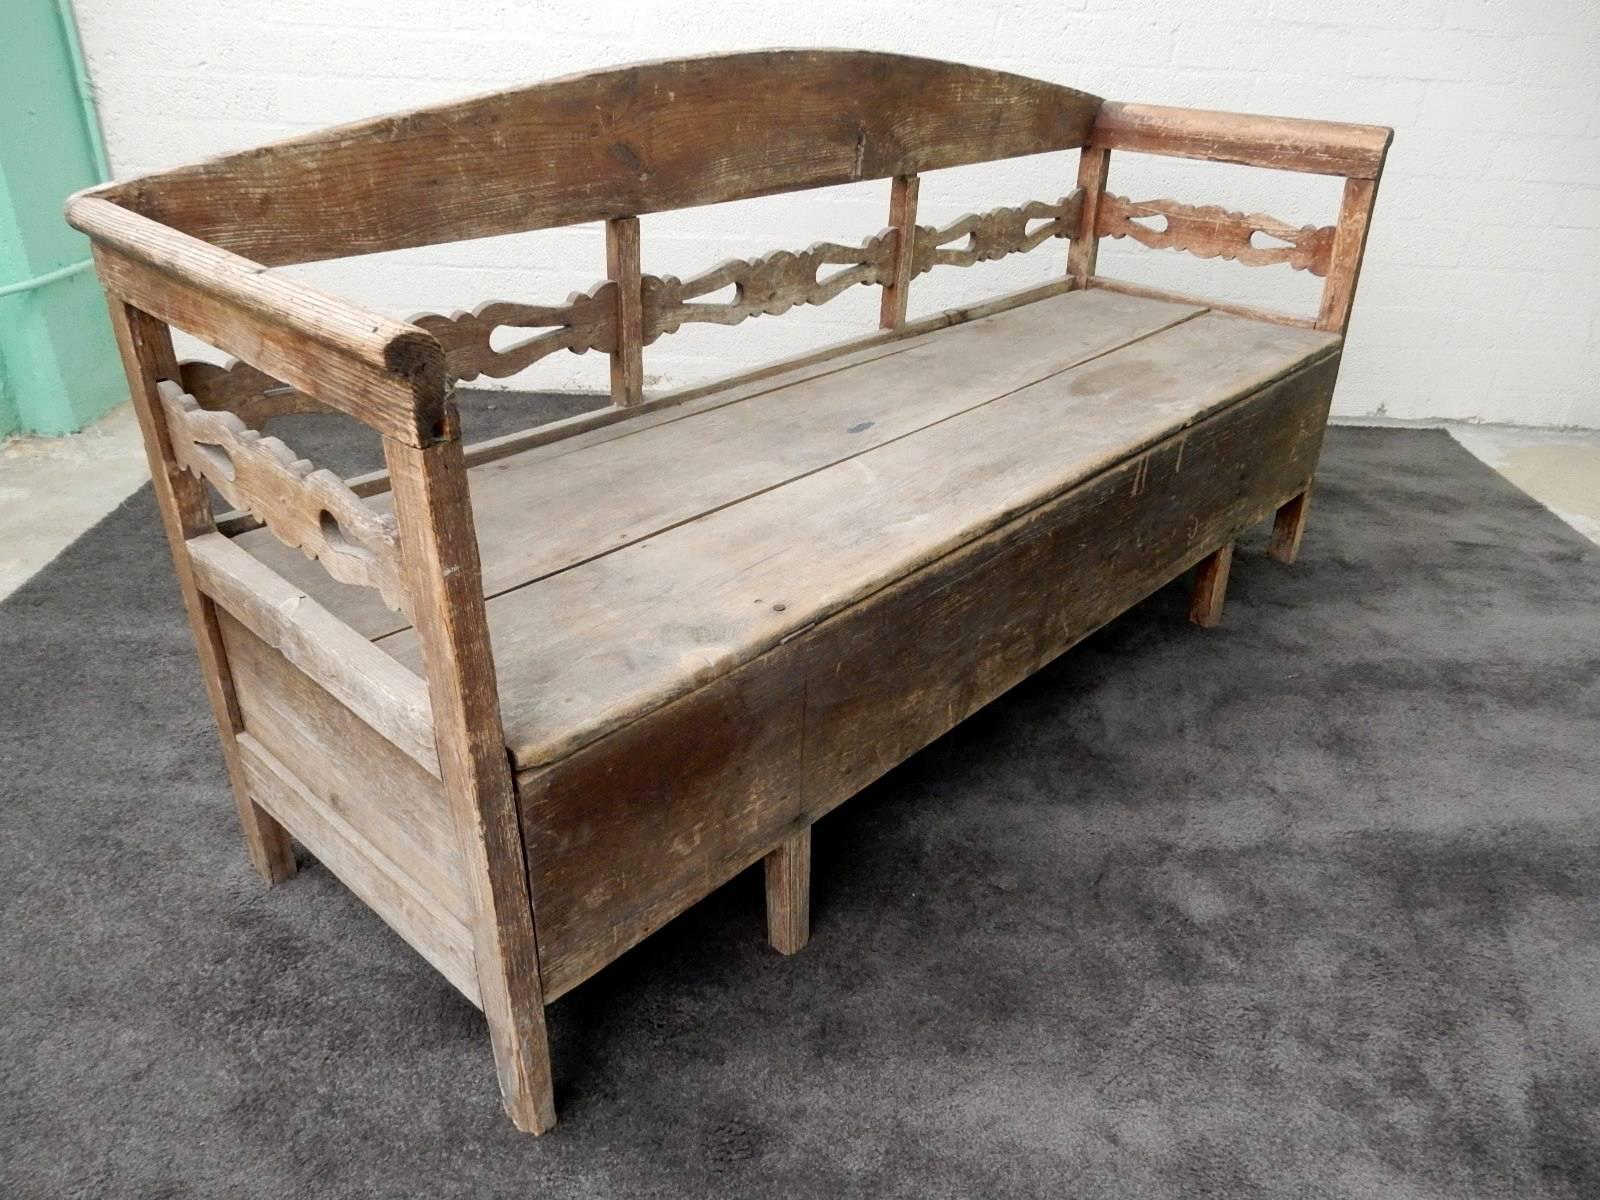 Primitive bench that opens to daybed, circa late 1800s.
Completely original with gorgeous aged wear and patina.
 